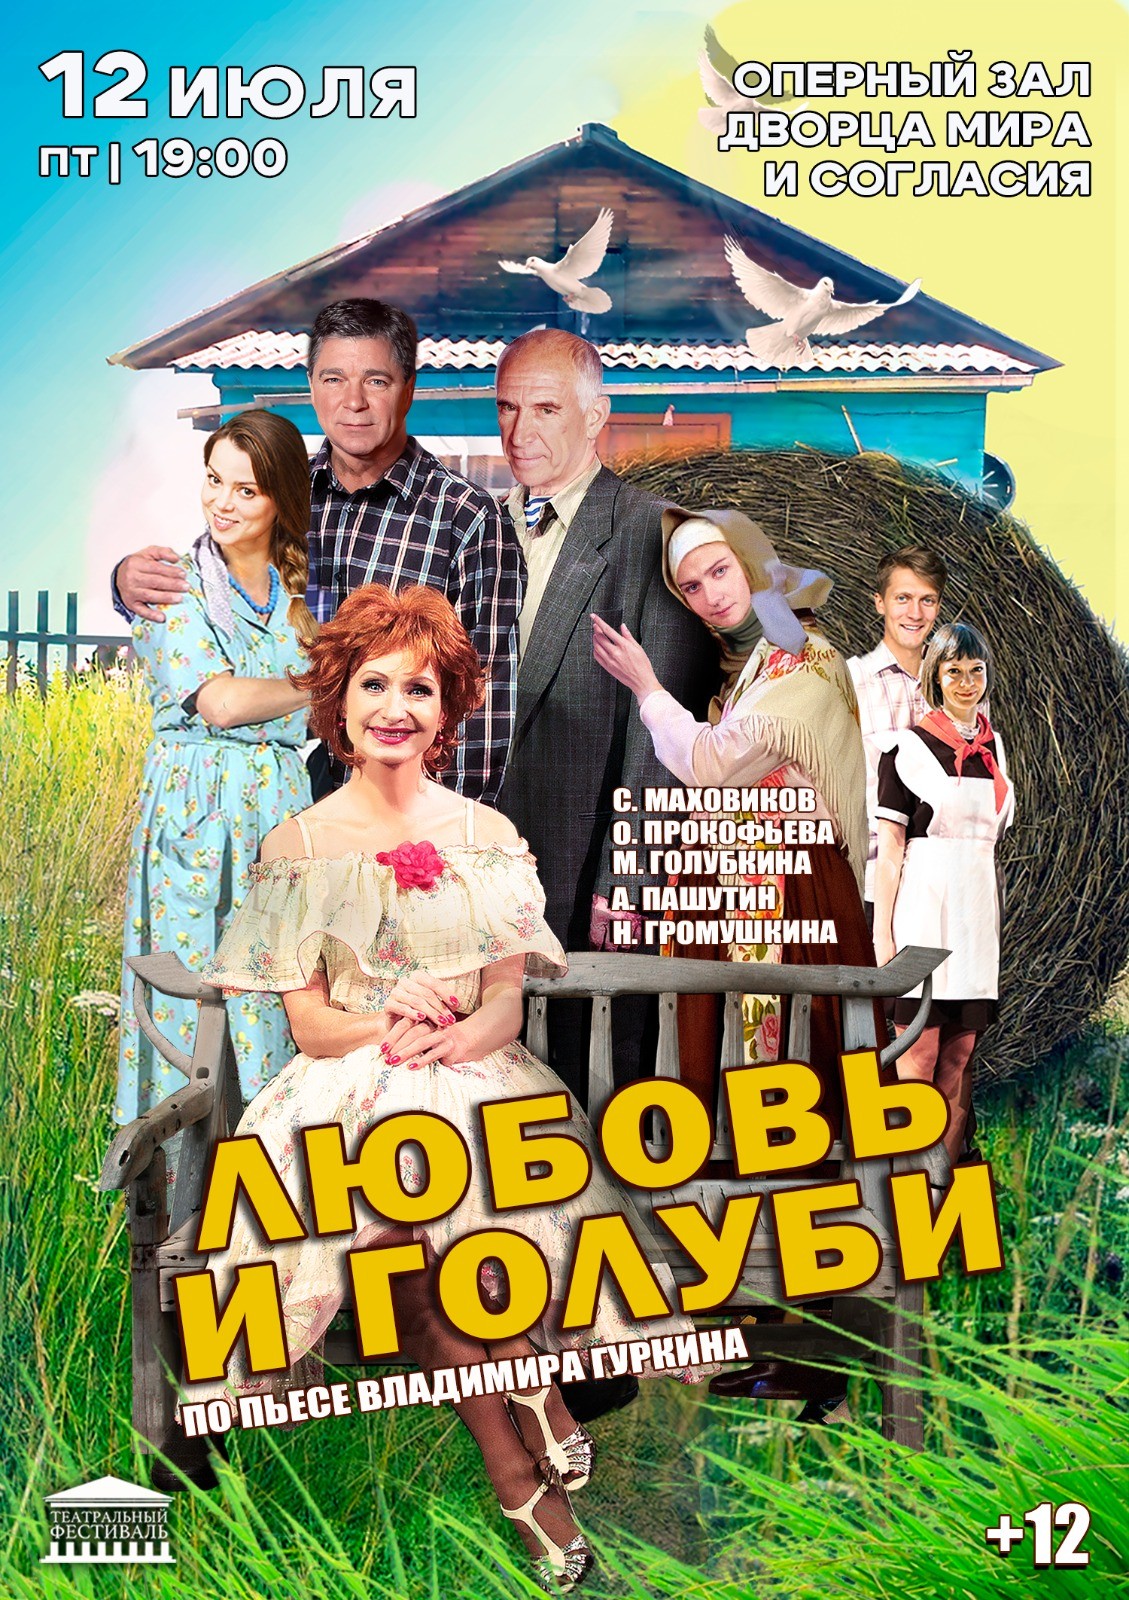 The play «Love and doves» in Astana